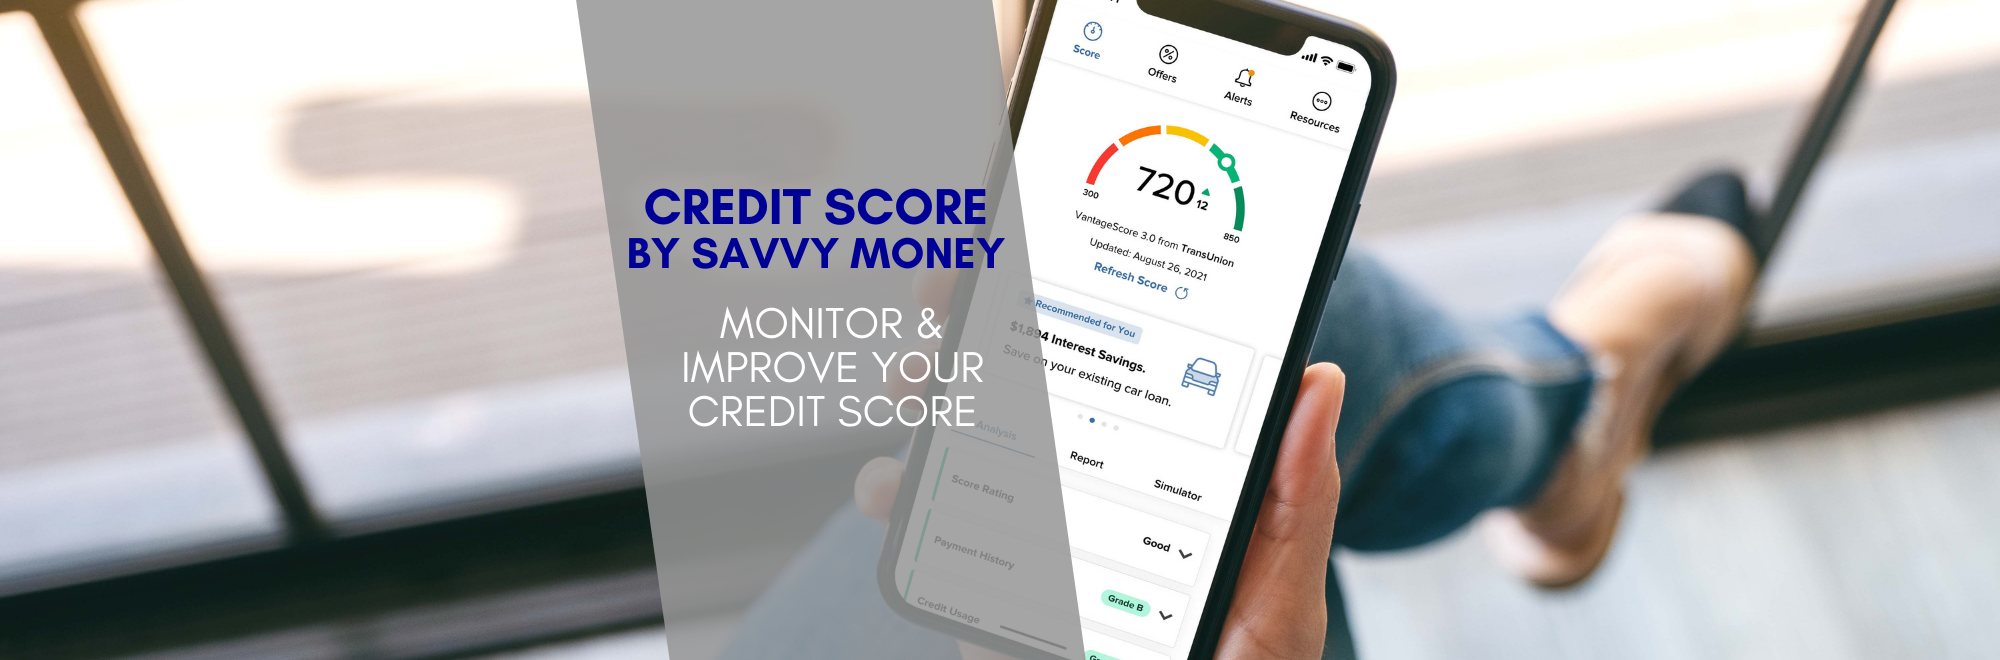 Credit Score by Savvy Money Monitor & Improve your credit score